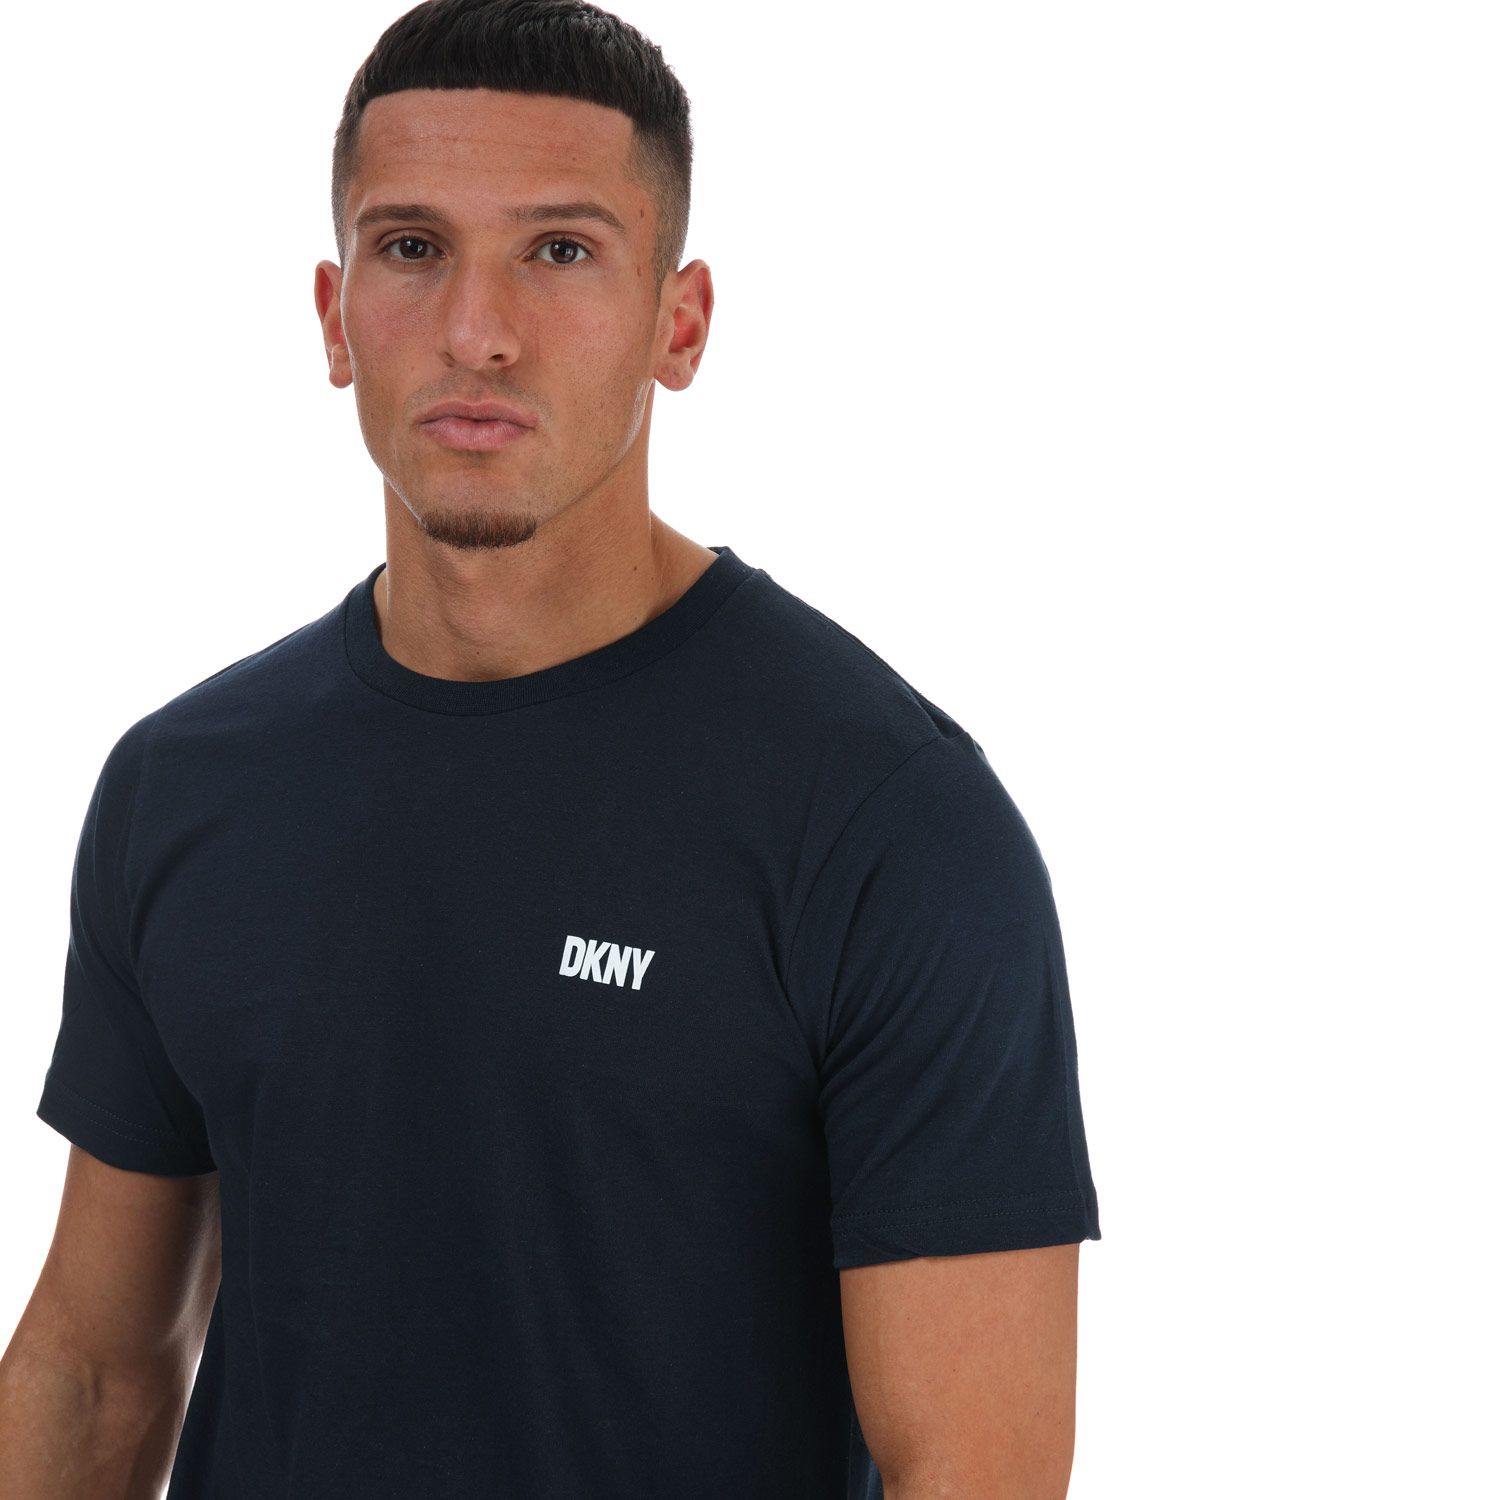 DKNY White Pack Get - T-Shirts Giants Mens Navy Label The Lounge 3